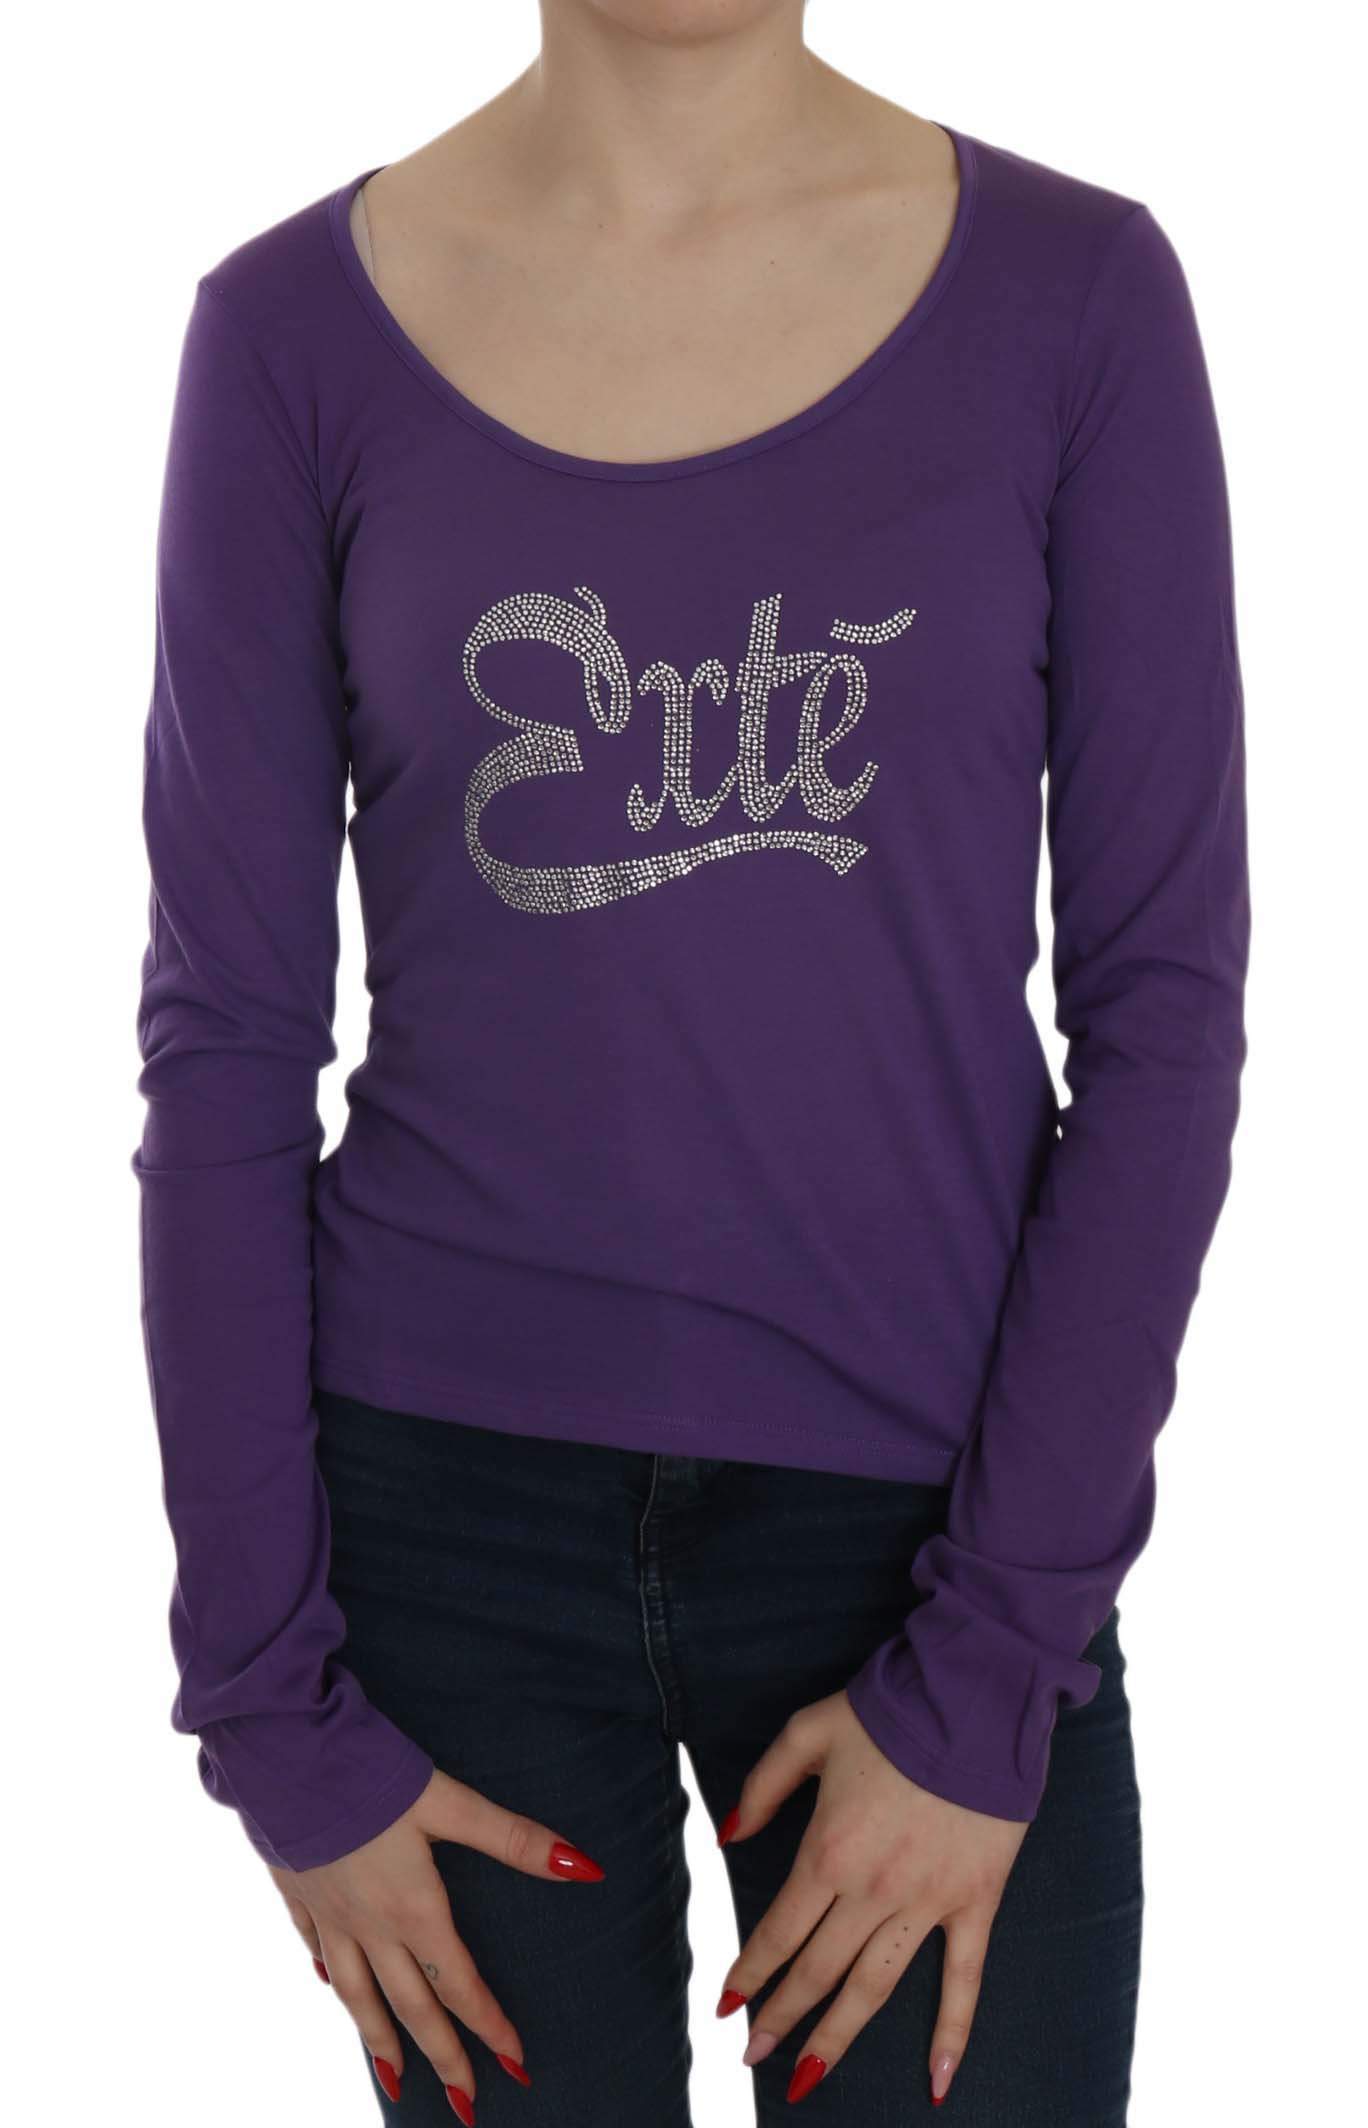 Exte Purple Crystal Embellished Long Sleeve Casual Top #women, Catch, Exte, feed-agegroup-adult, feed-color-purple, feed-gender-female, feed-size-IT38|XS, feed-size-IT40|S, feed-size-IT42|M, feed-size-IT44|L, feed-size-IT46|XL, Gender_Women, IT38|XS, IT40|S, IT42|M, IT44|L, IT46|XL, Kogan, Purple, Tops & T-Shirts - Women - Clothing, Women - New Arrivals at SEYMAYKA